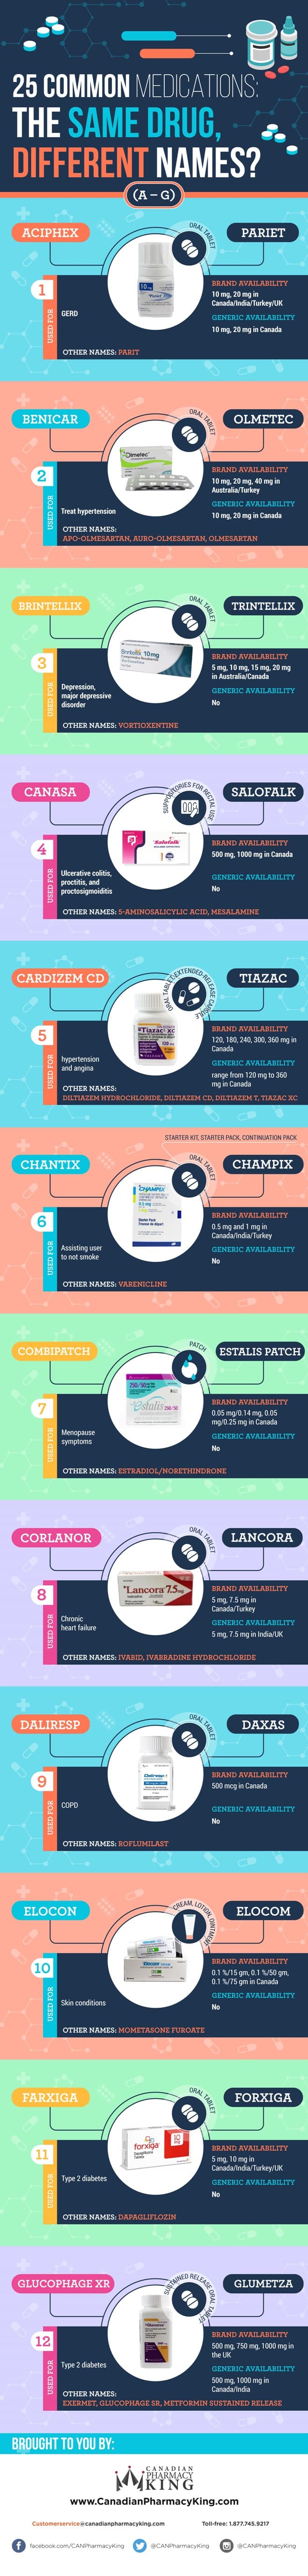 25 Common Medications Names Infographic Part 1